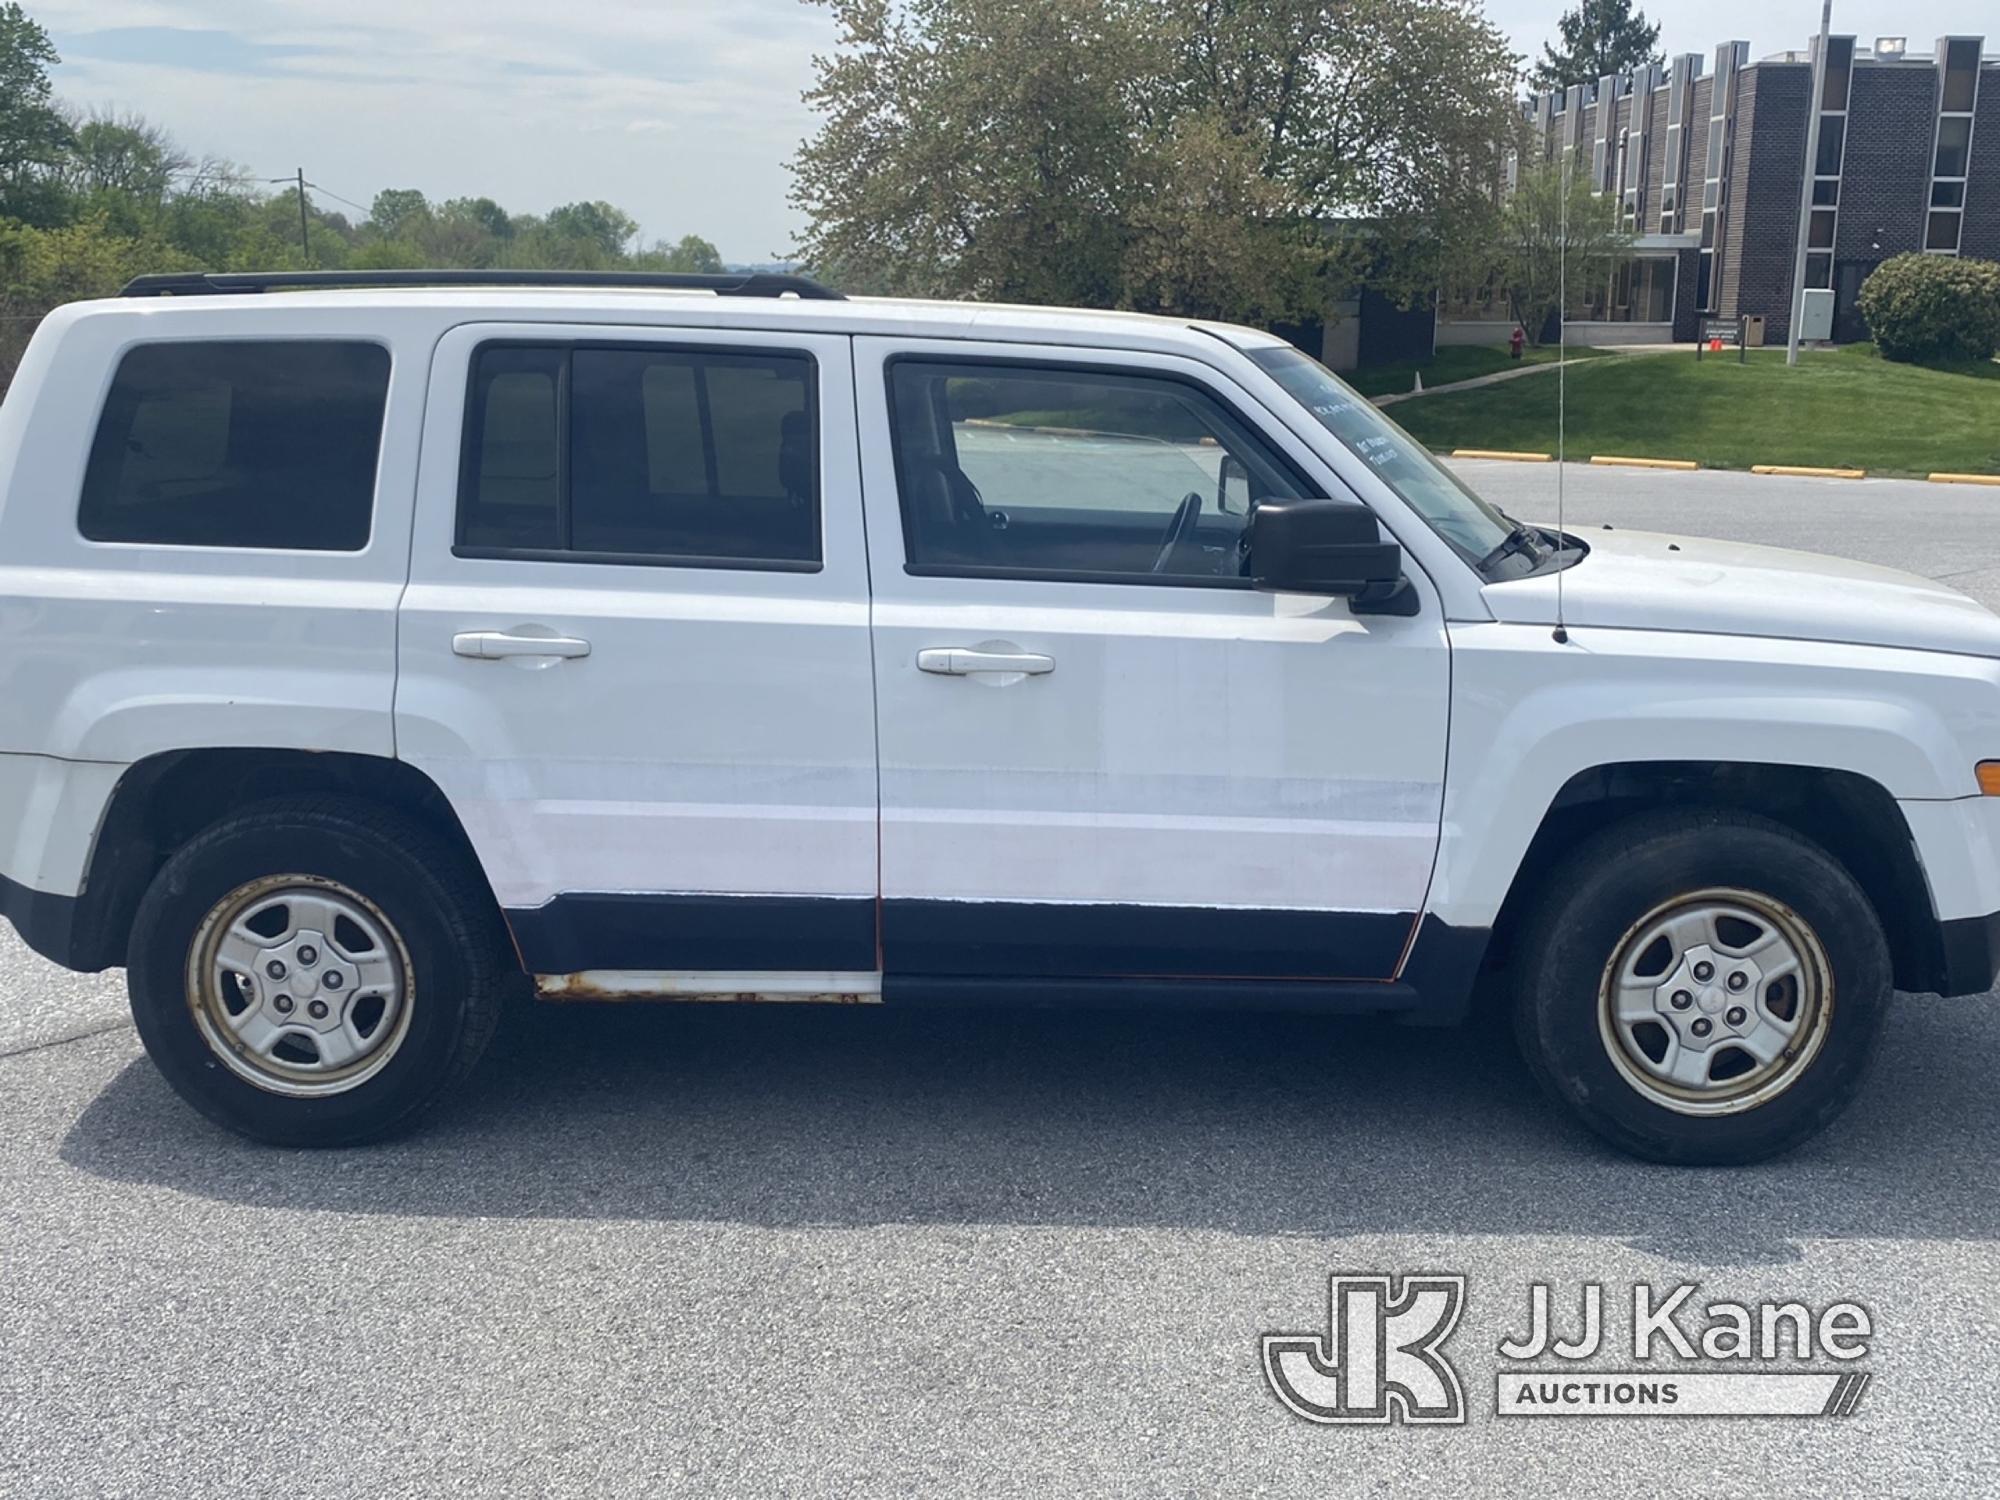 (Chester Springs, PA) 2012 Jeep Patriot 4x4 4-Door Sport Utility Vehicle Not Running, Condition Unkn